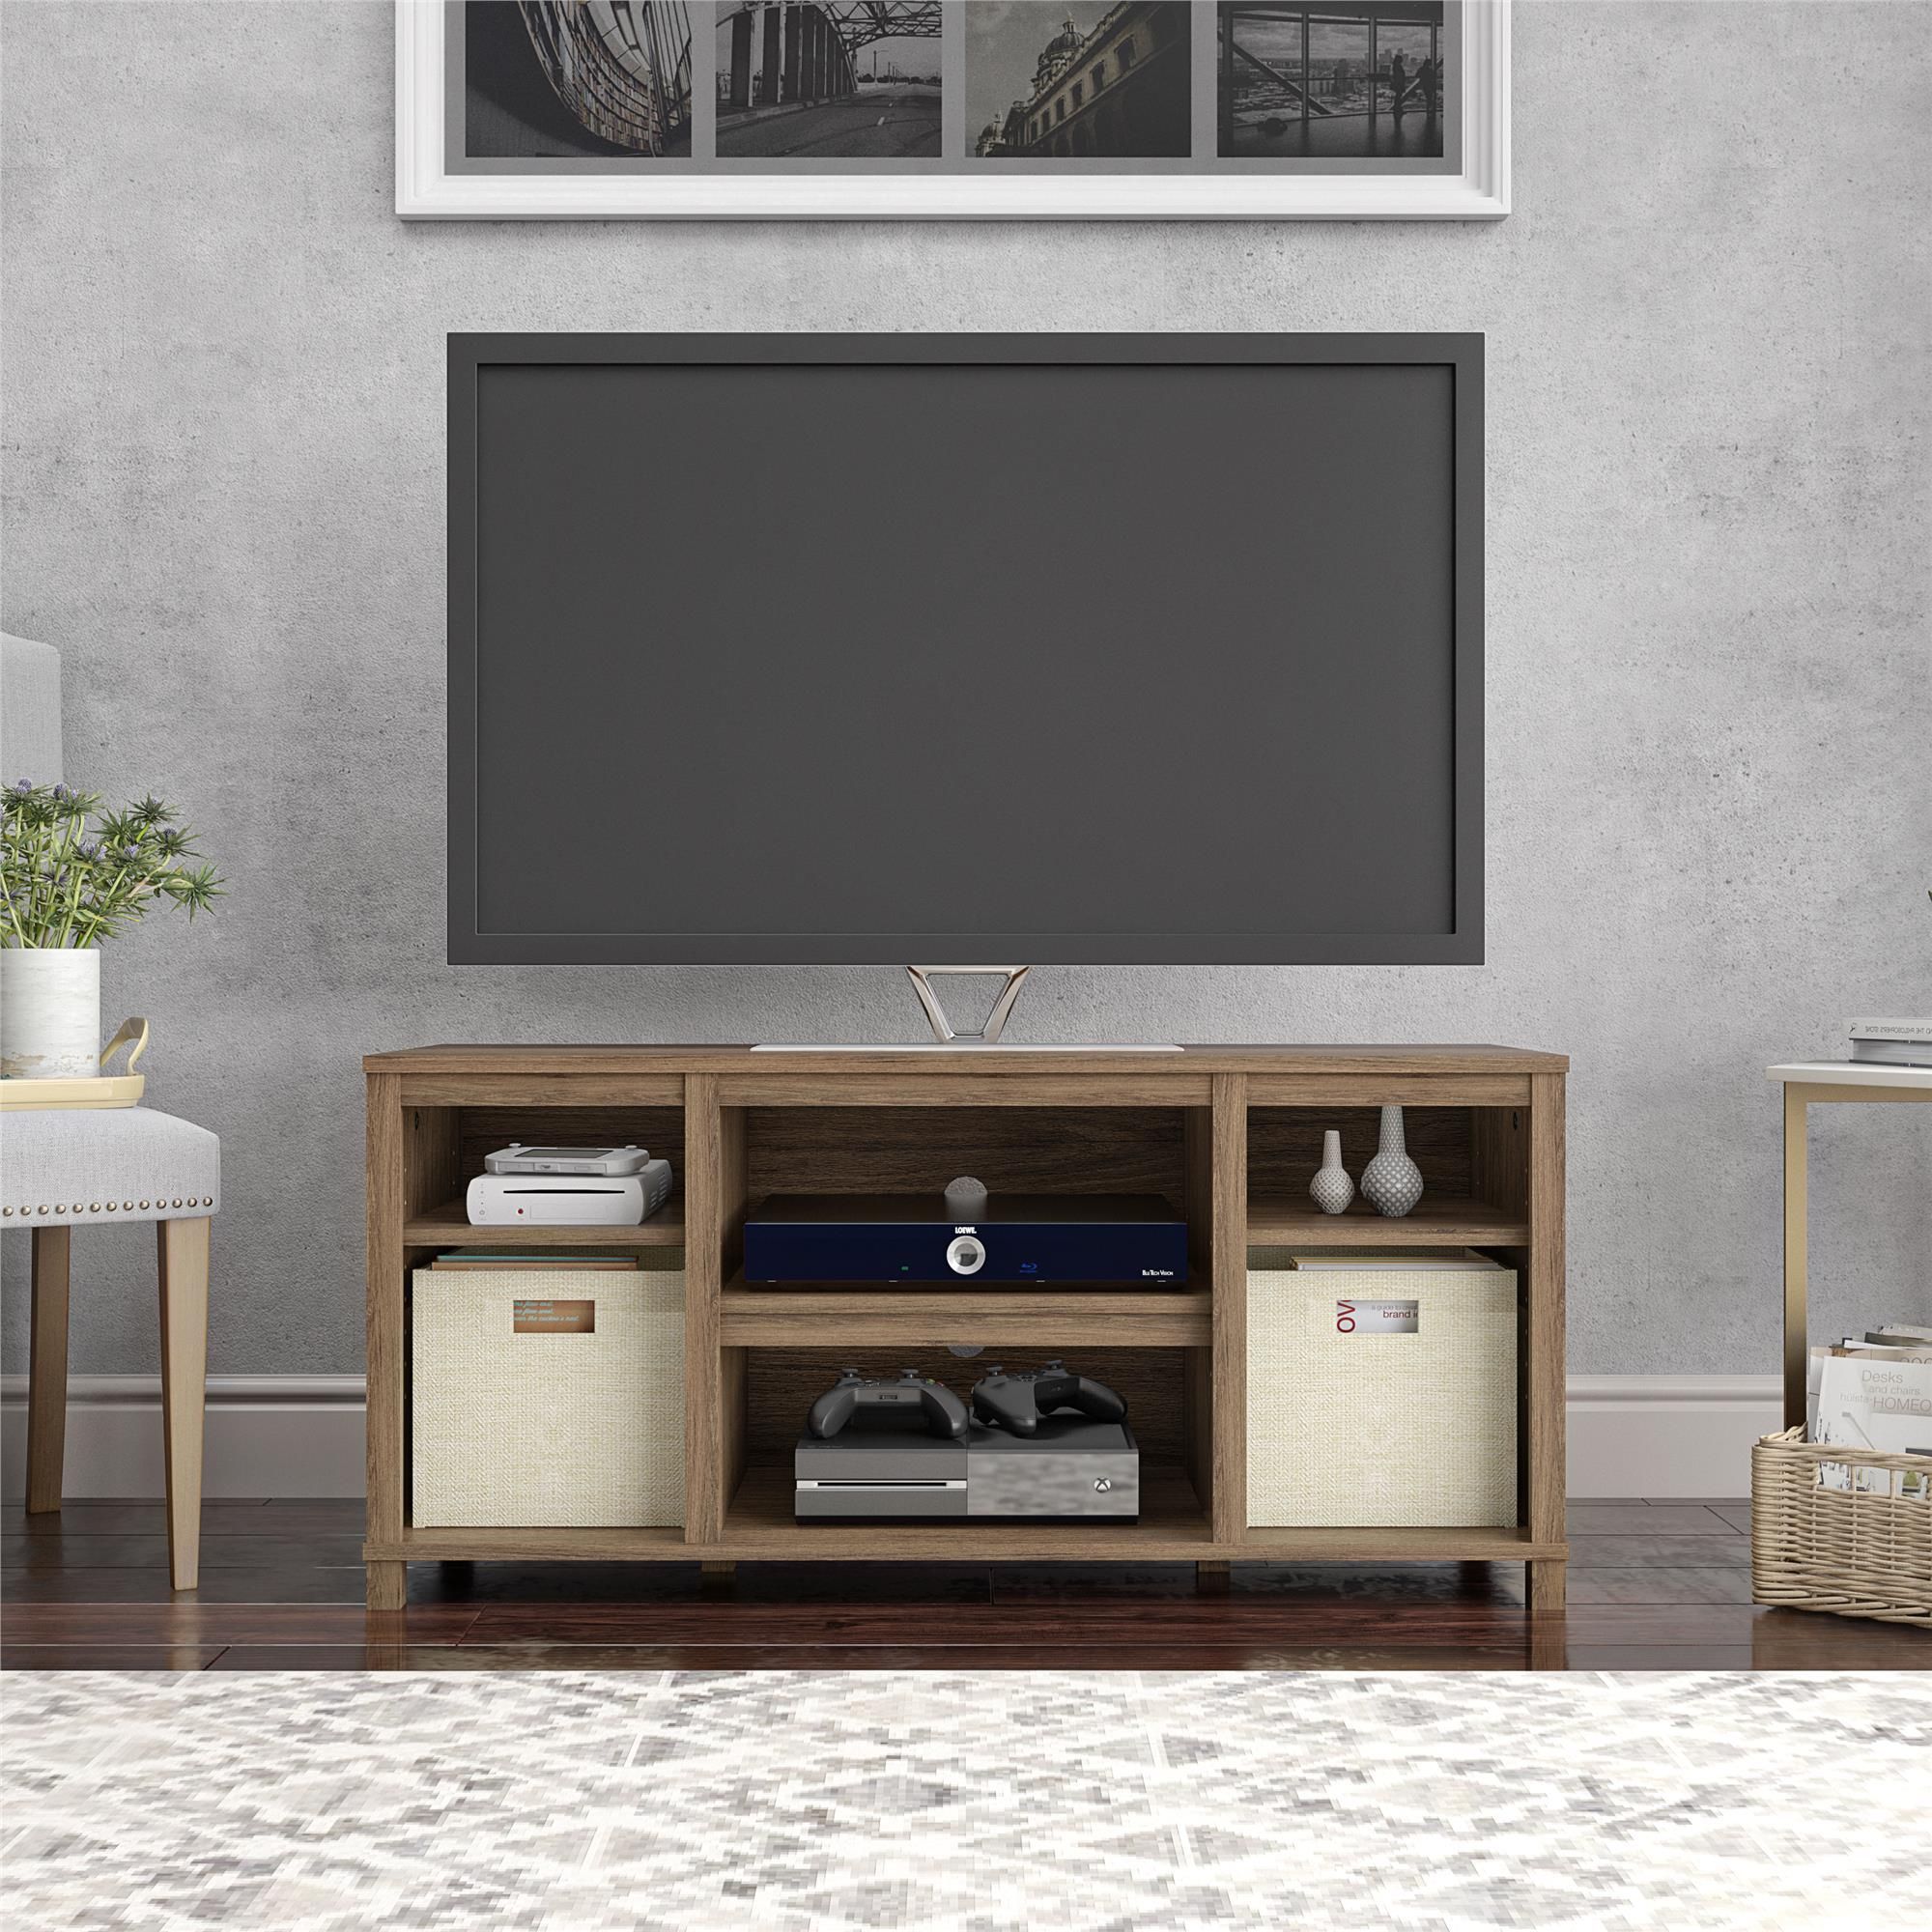 Mainstays Parsons Cubby Tv Stand For Tvs Up To 50", Rustic Throughout Allegra Tv Stands For Tvs Up To 50" (View 6 of 15)